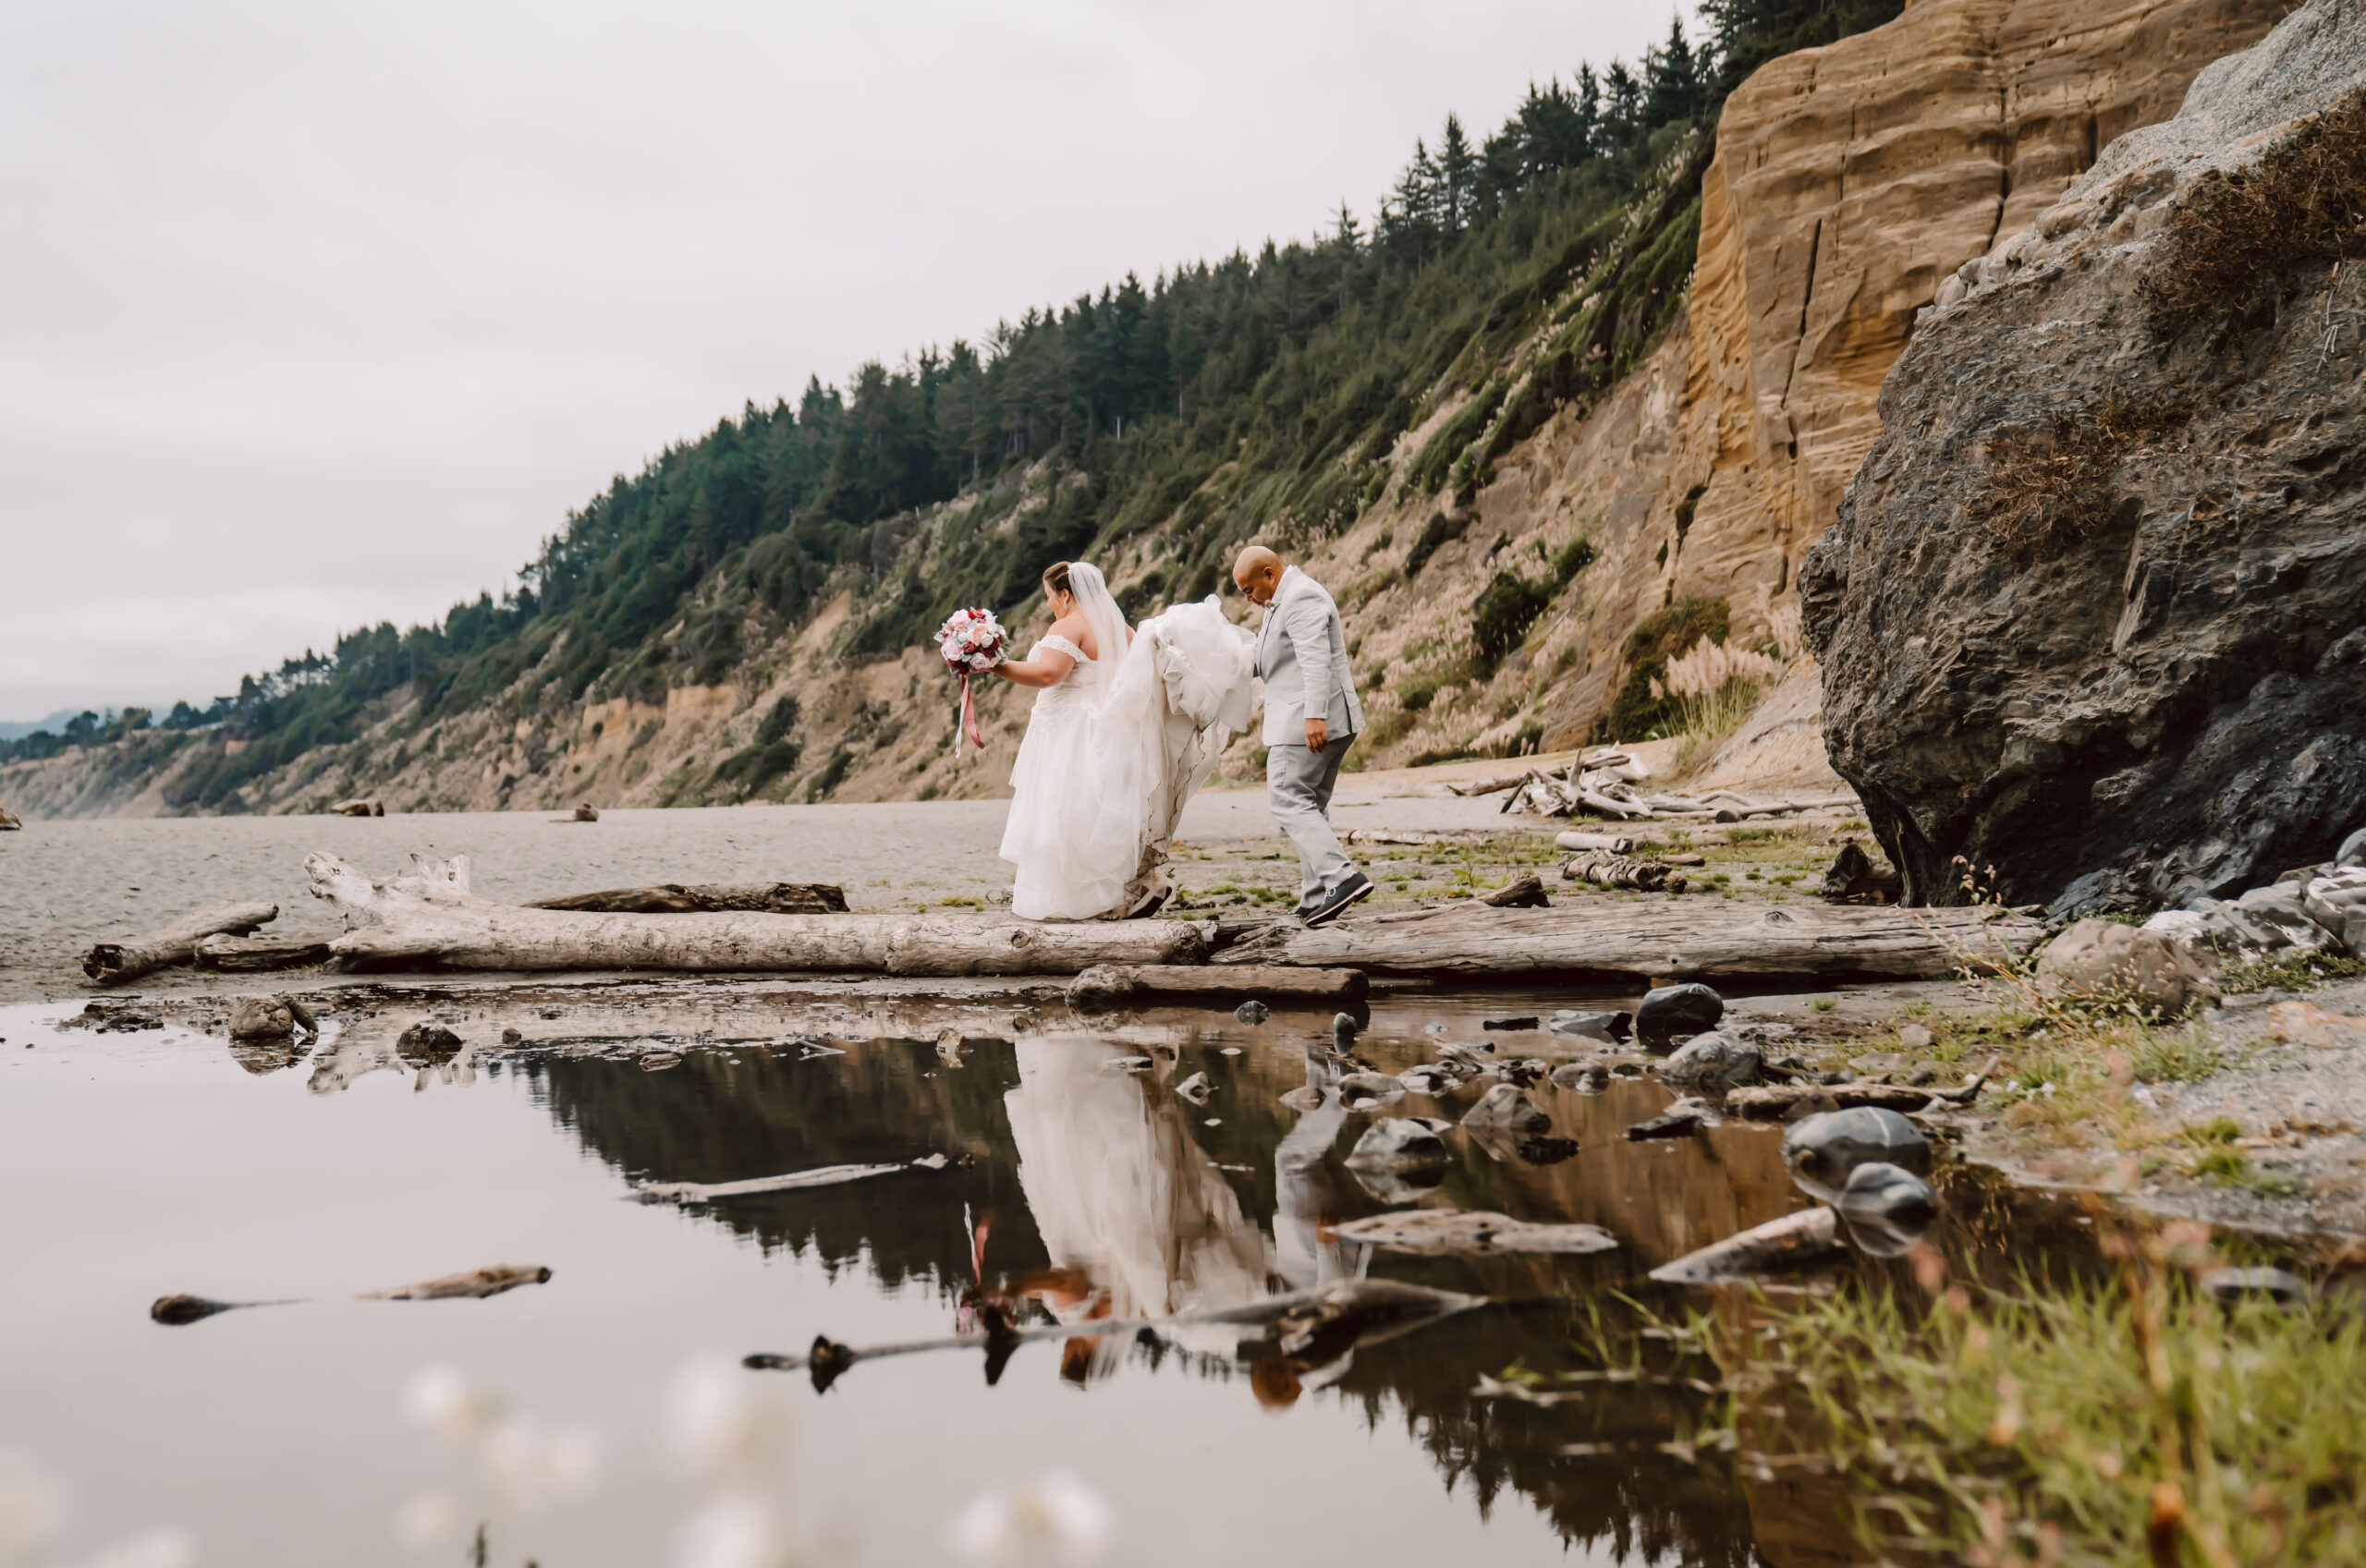 A bride and groom walking over a log to get the beach for their elopement ceremony on the California coast